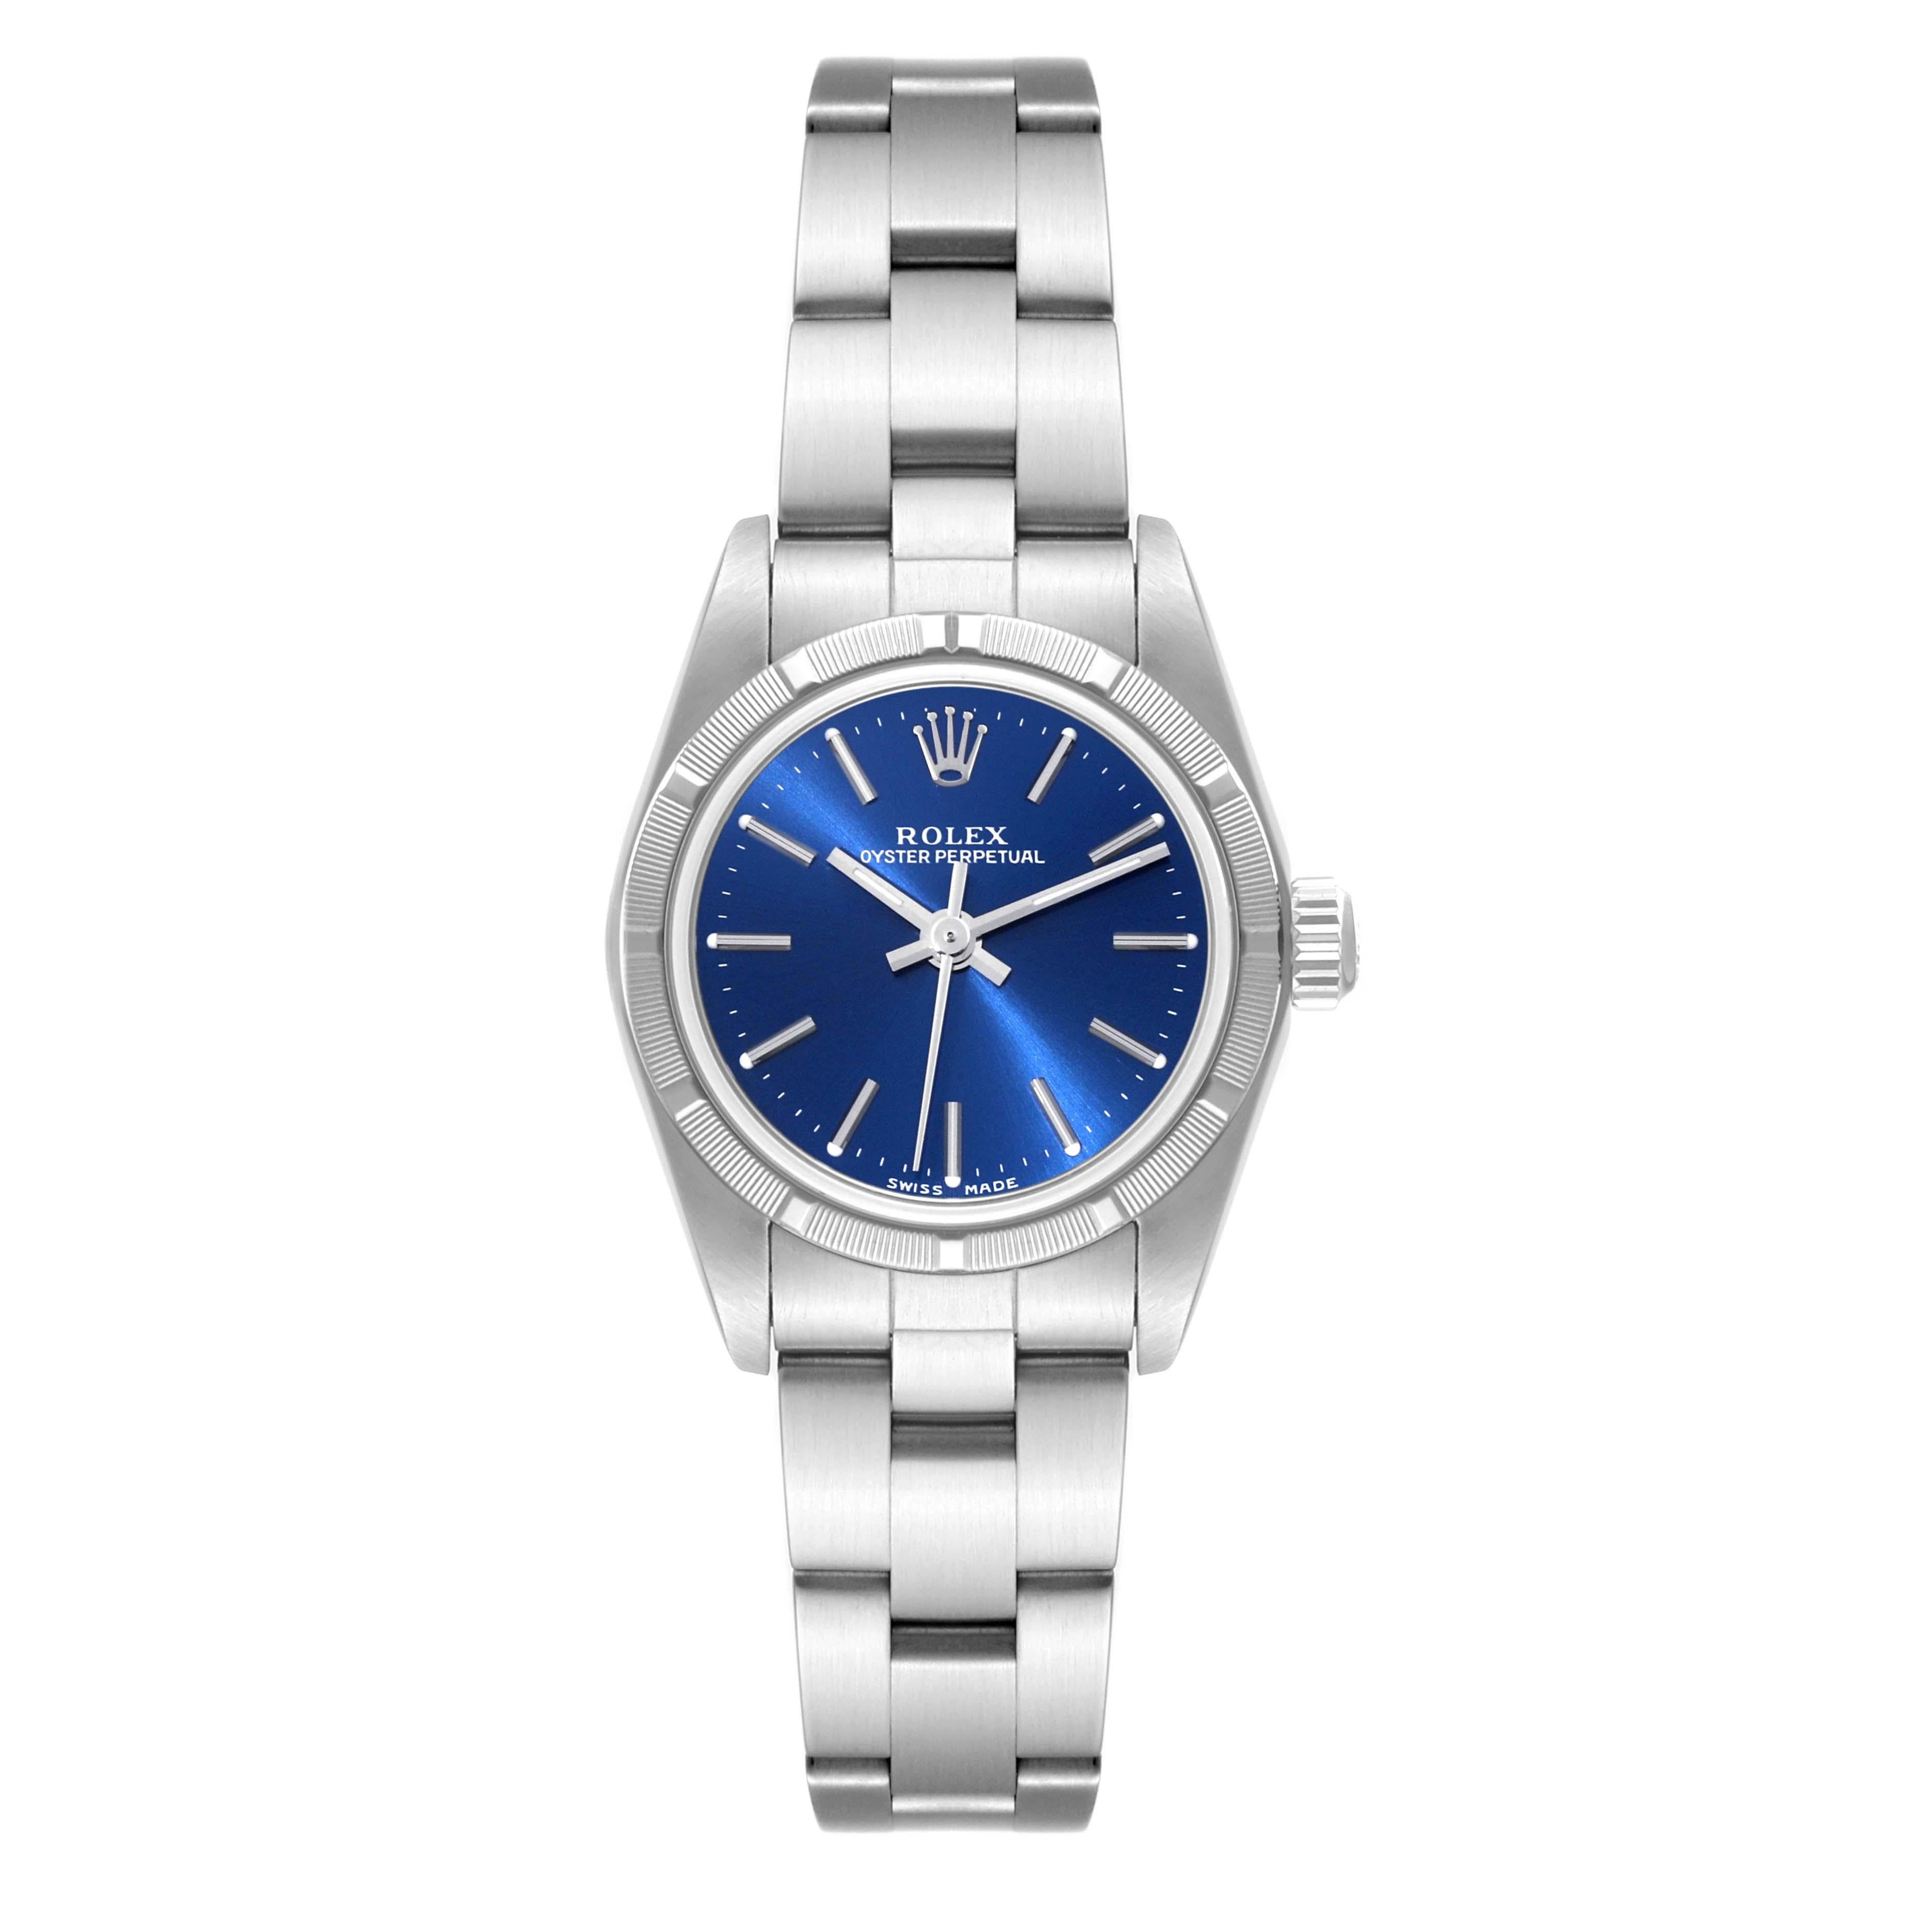 Rolex Oyster Perpetual NonDate Blue Dial Steel Ladies Watch 76030. Officially certified chronometer automatic self-winding movement. Stainless steel oyster case 24.0 mm in diameter. Rolex logo on a crown. Stainless steel engine turned bezel. Scratch